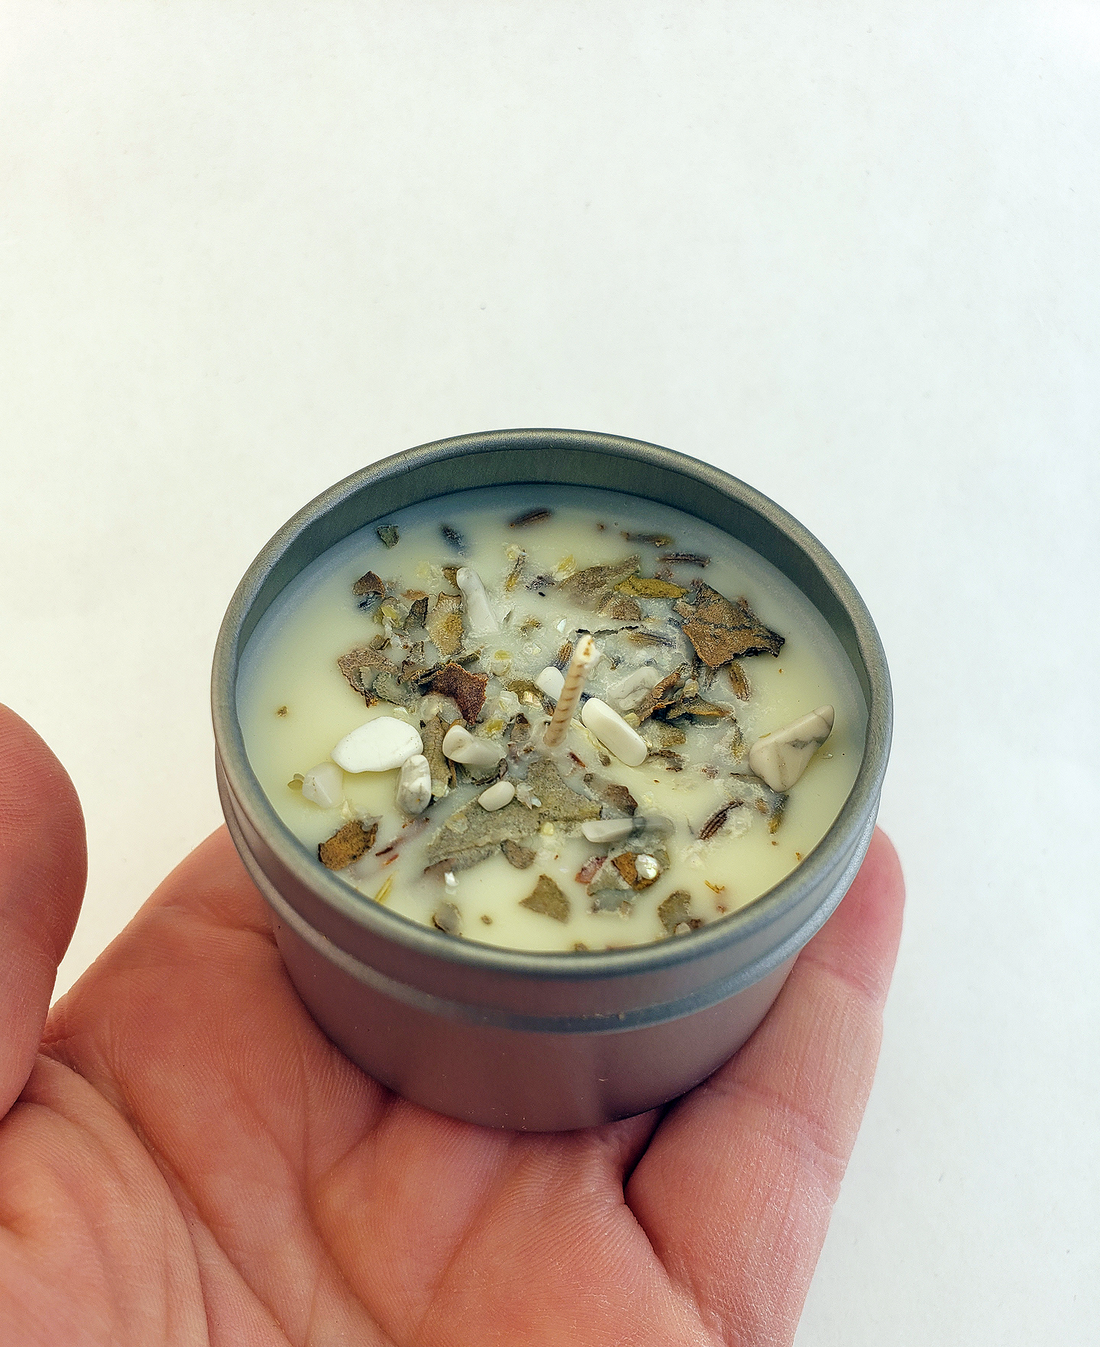 Stress Relief - 2oz Natural Coconut Soy Wax Handmade Scented Candle - Scented with Essential Oils - White Sage Lavender